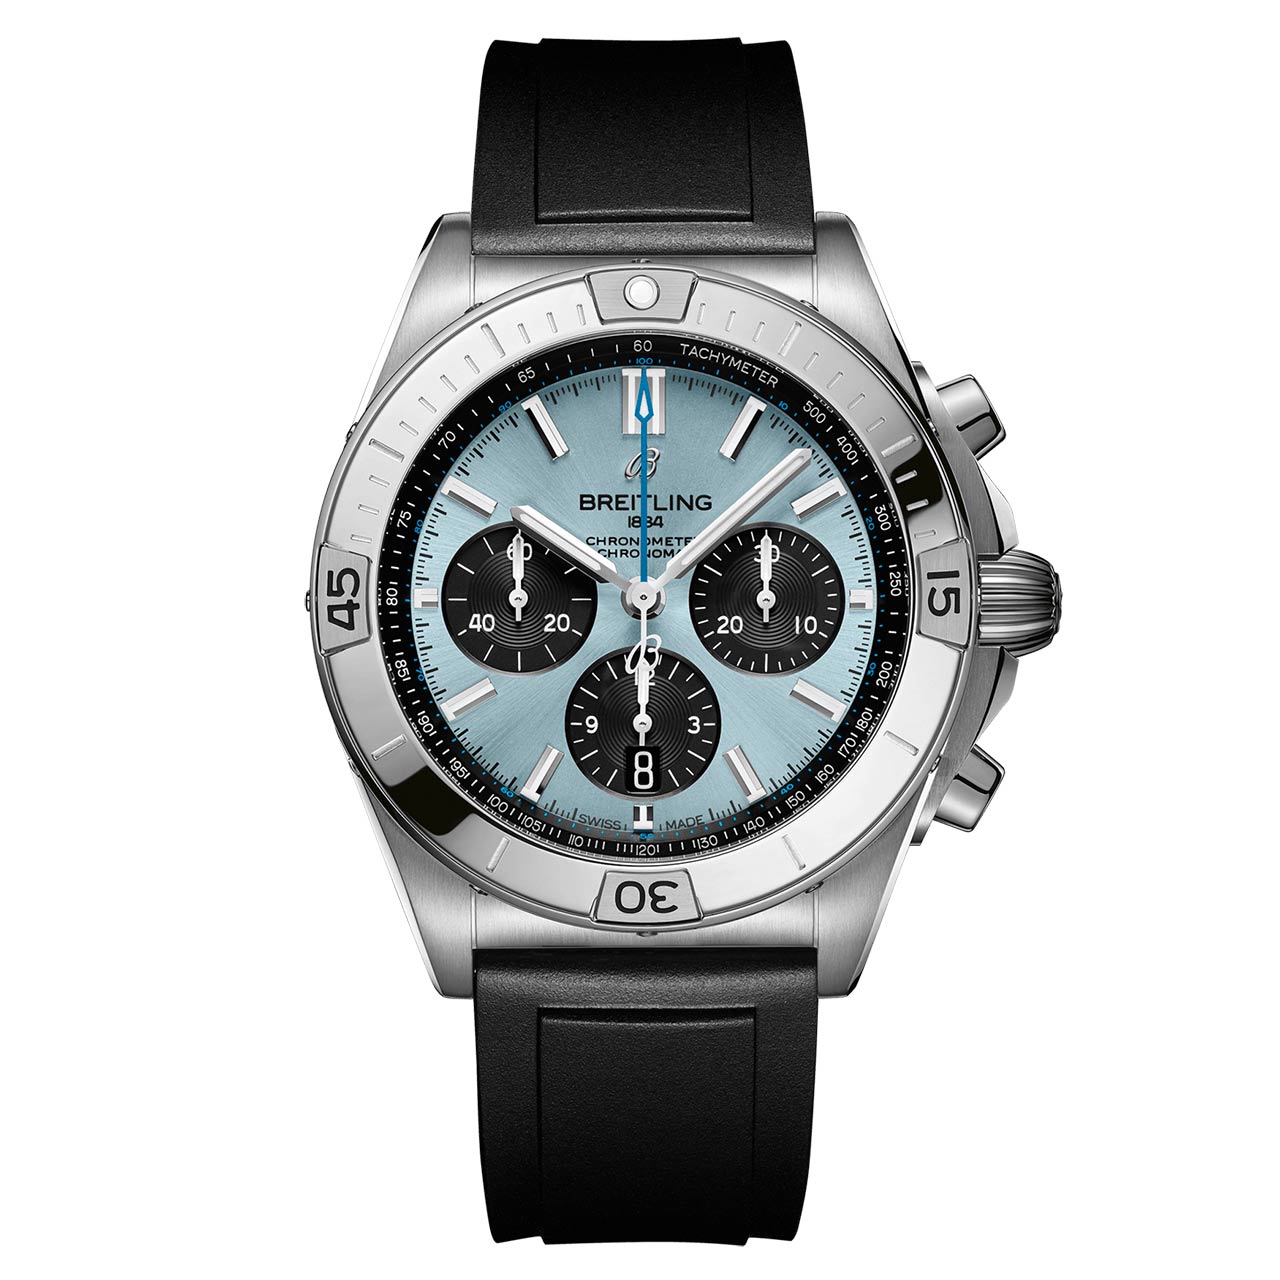 Introducing The Breitling Chronomat B01 42 Ice Blue Watch – WristReview.com  – Featuring Watch Reviews, Critiques, Reports & News